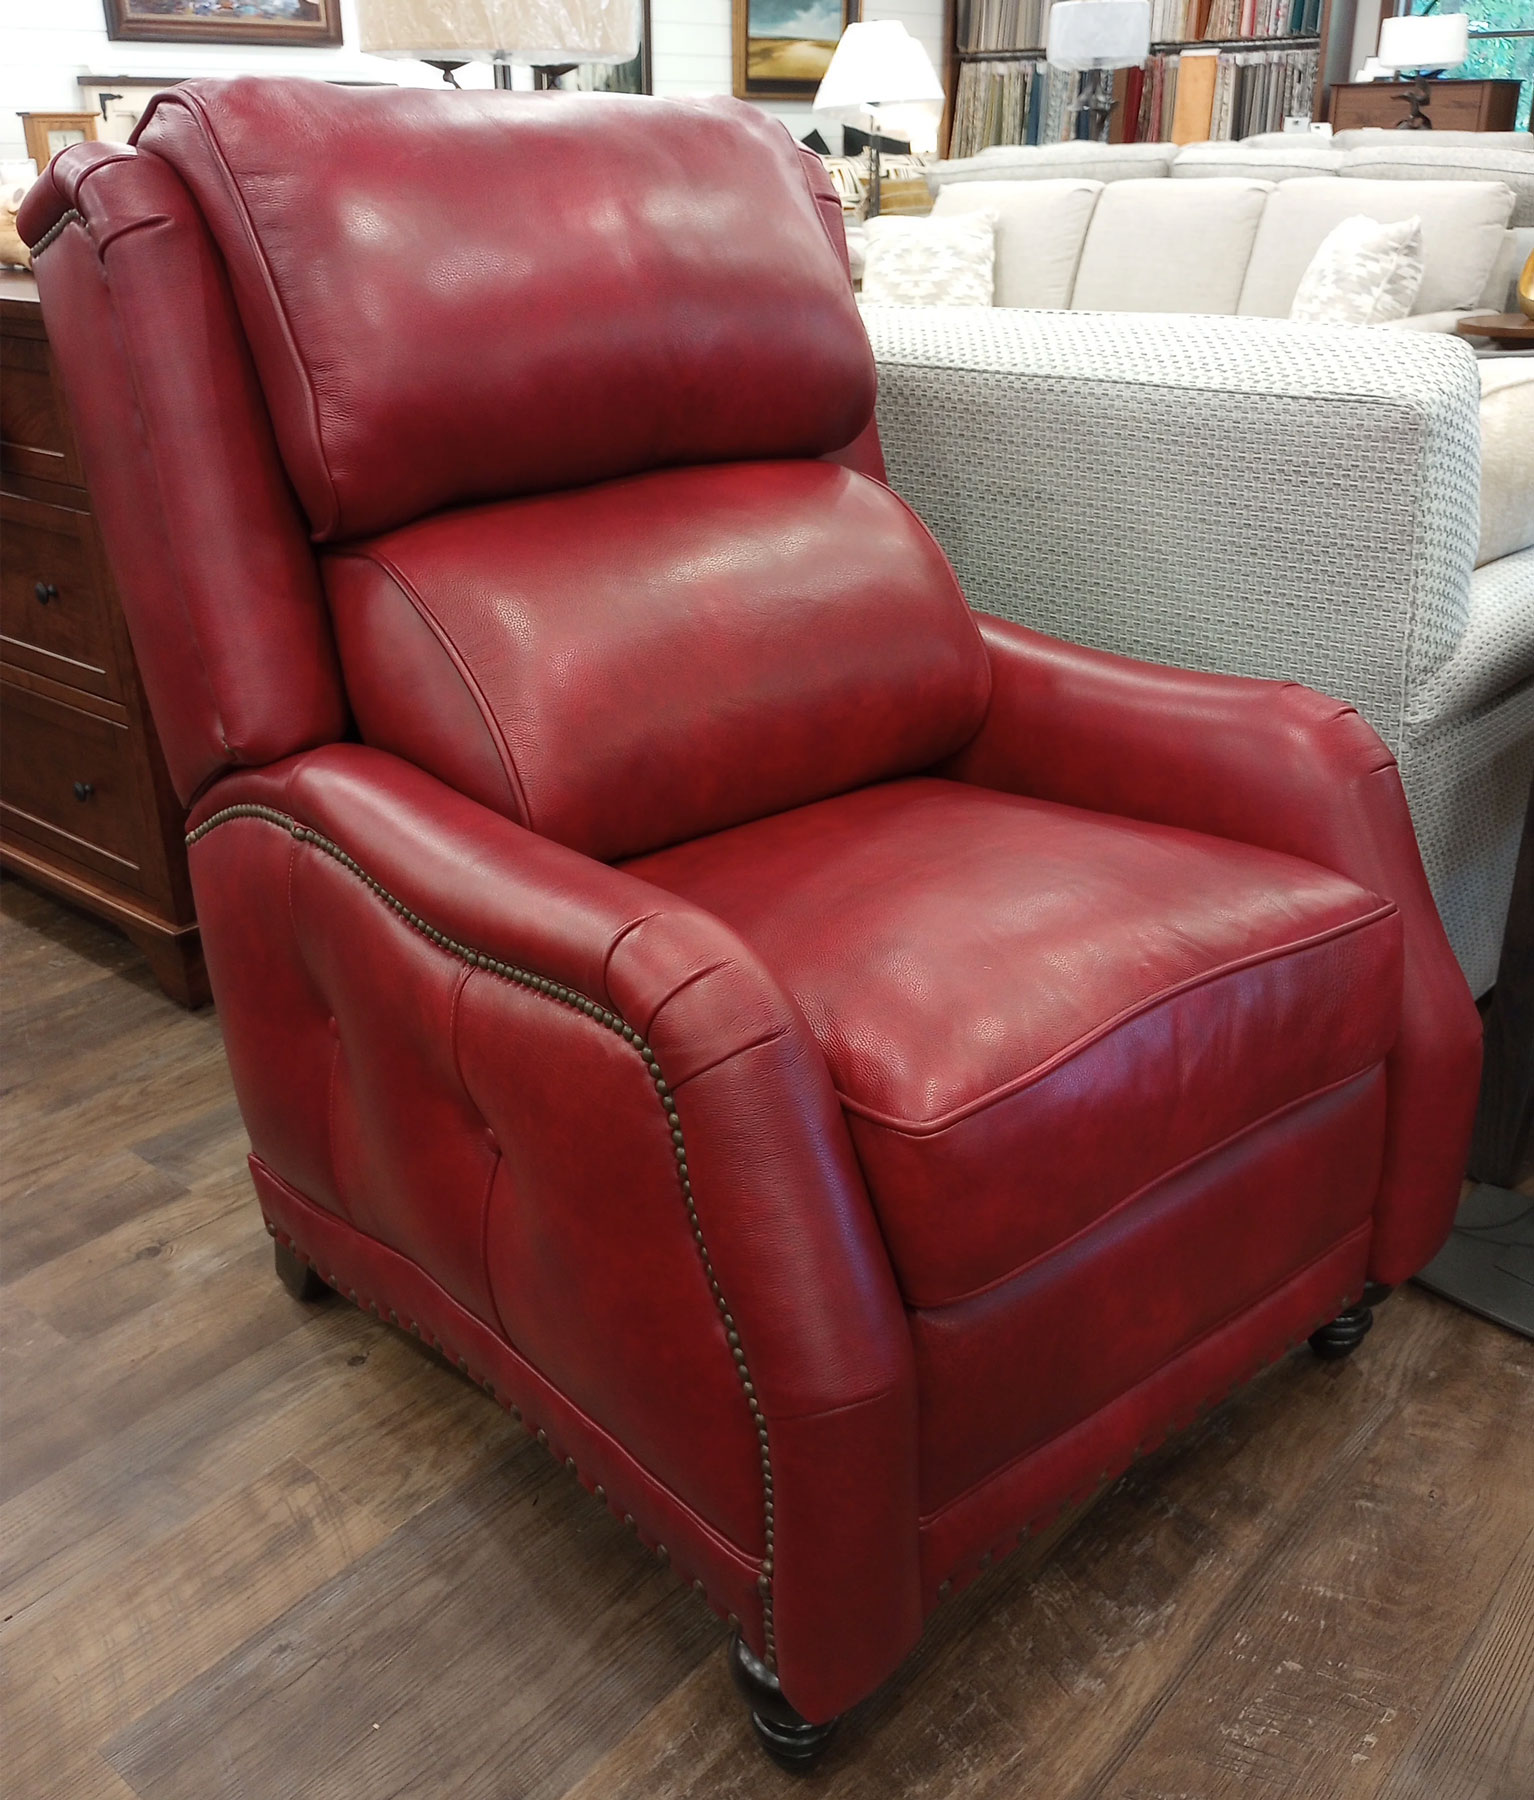 CC Leather 881 Reagan Recliner in Williamsburg Colonial Red Leather